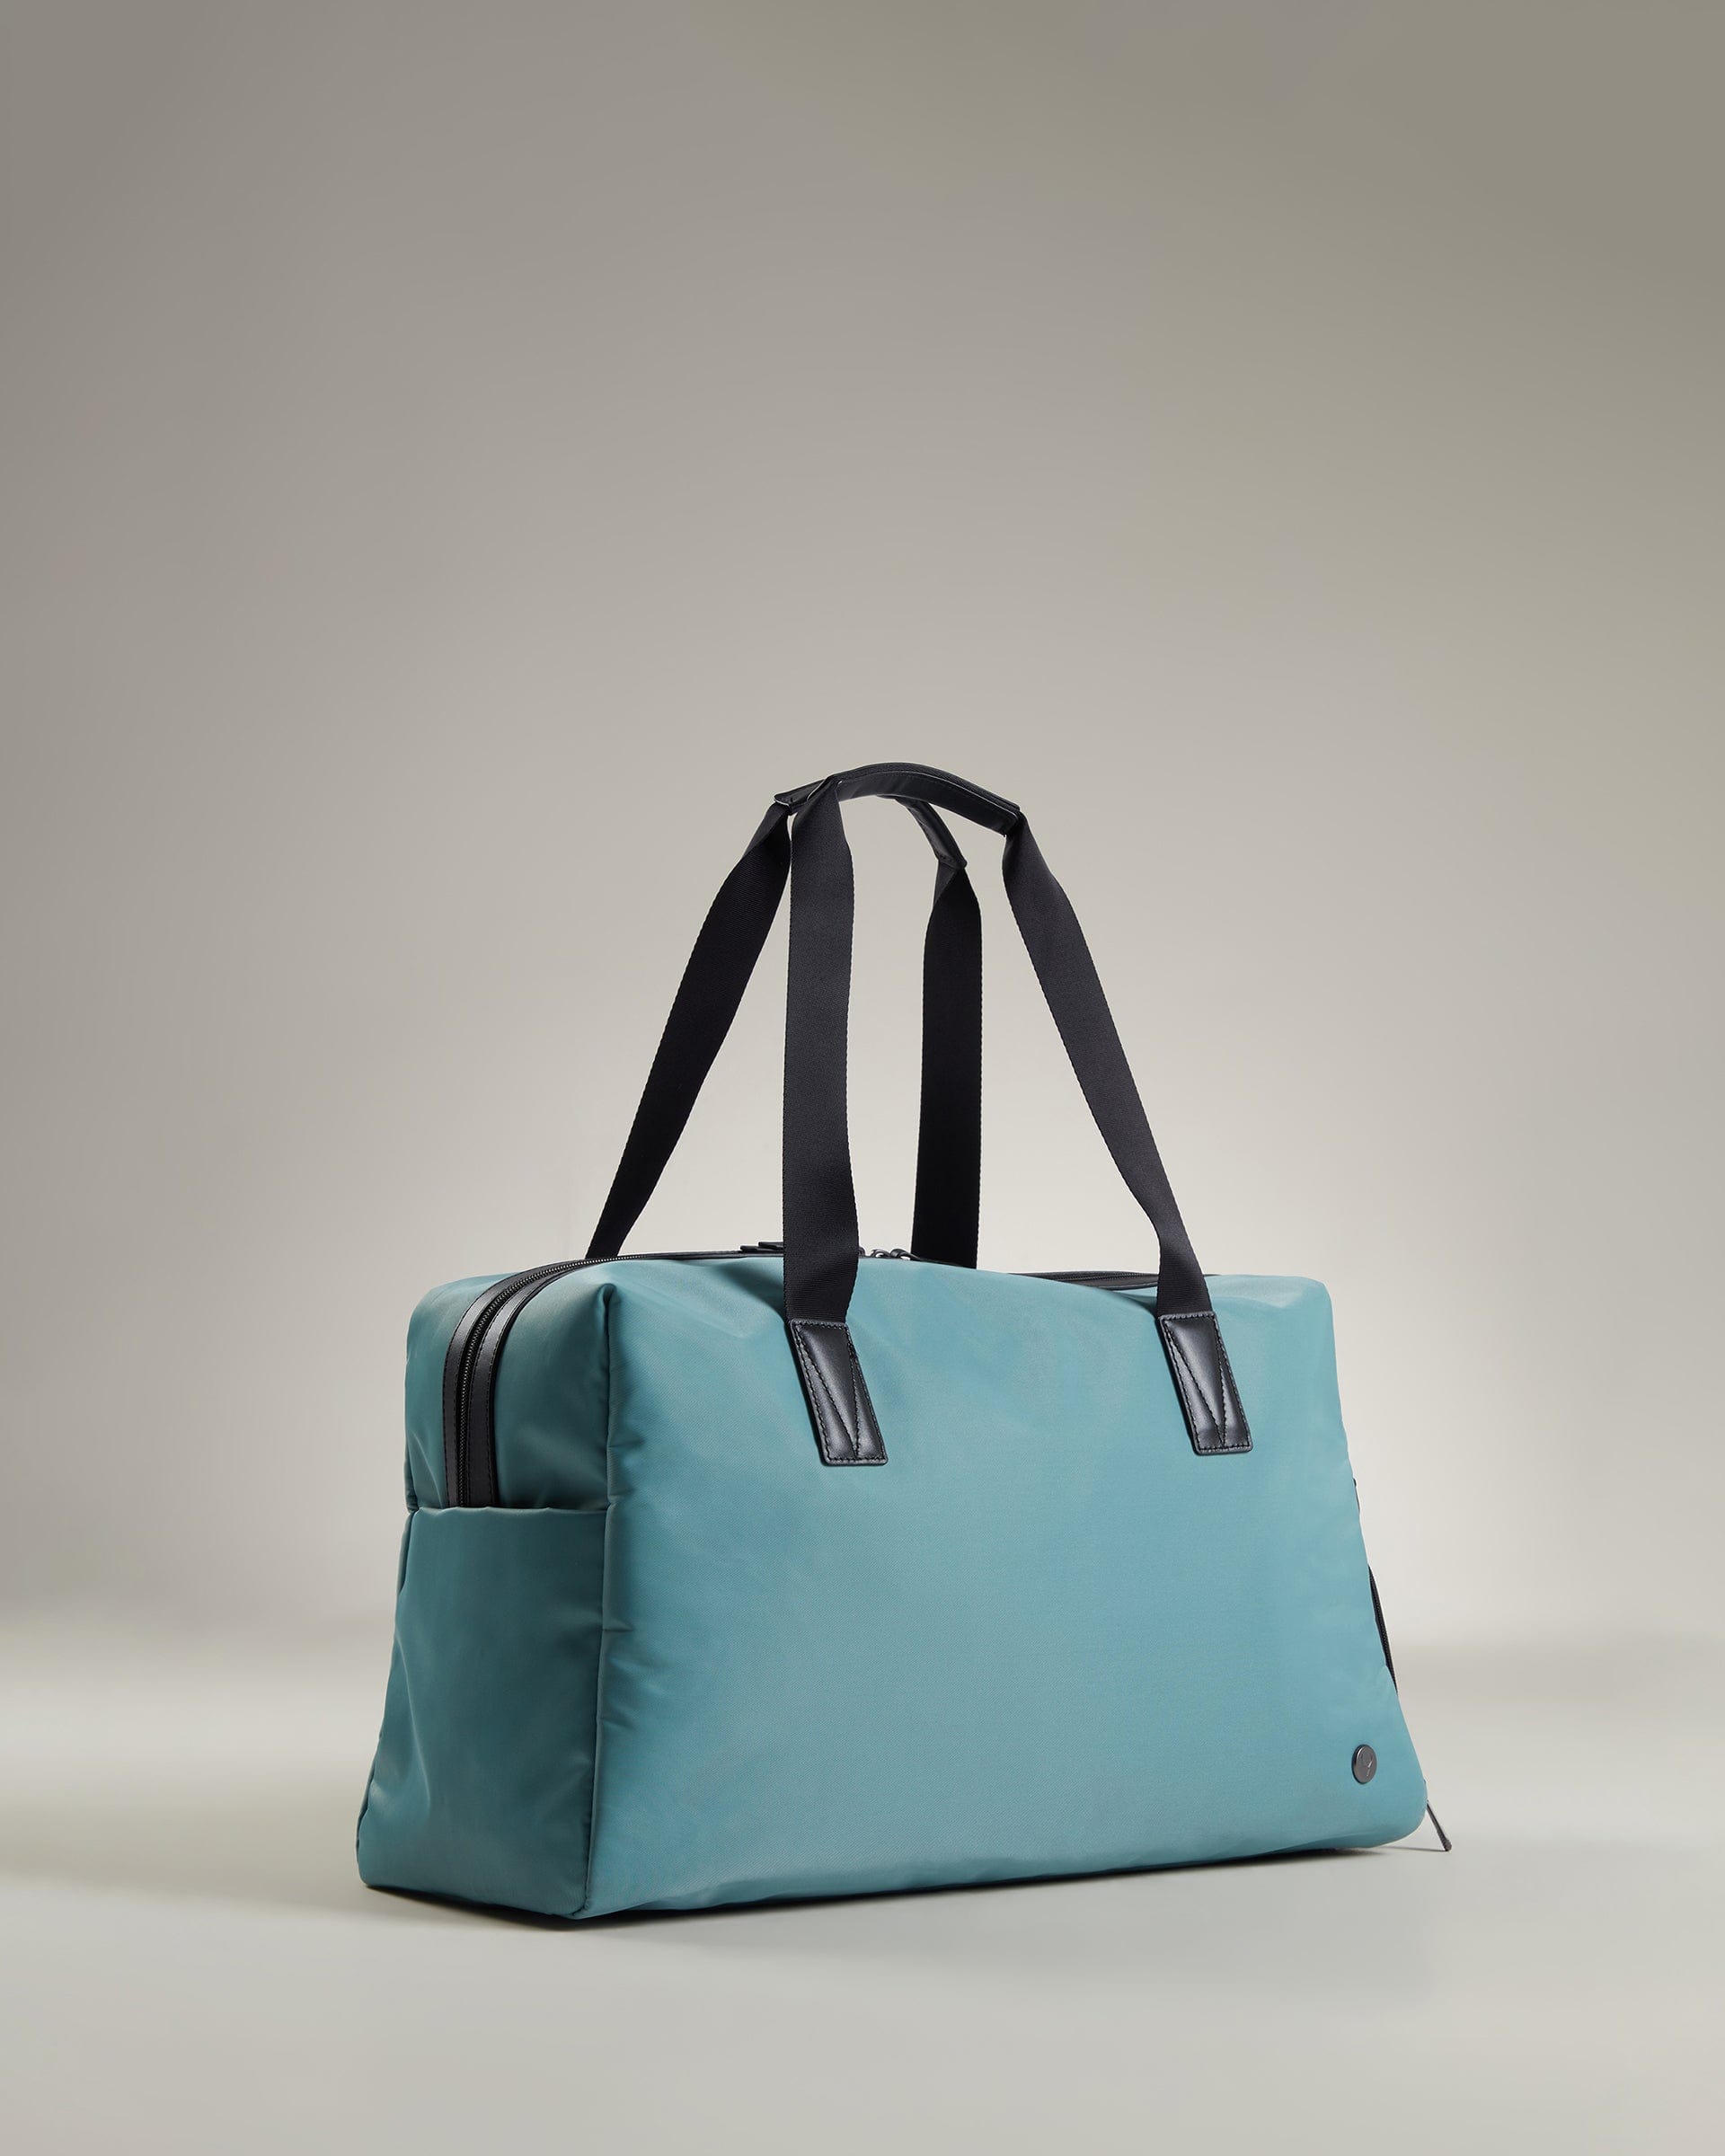 View Antler Chelsea Weekender In Mineral Size 53 x 32 x 23 cm information